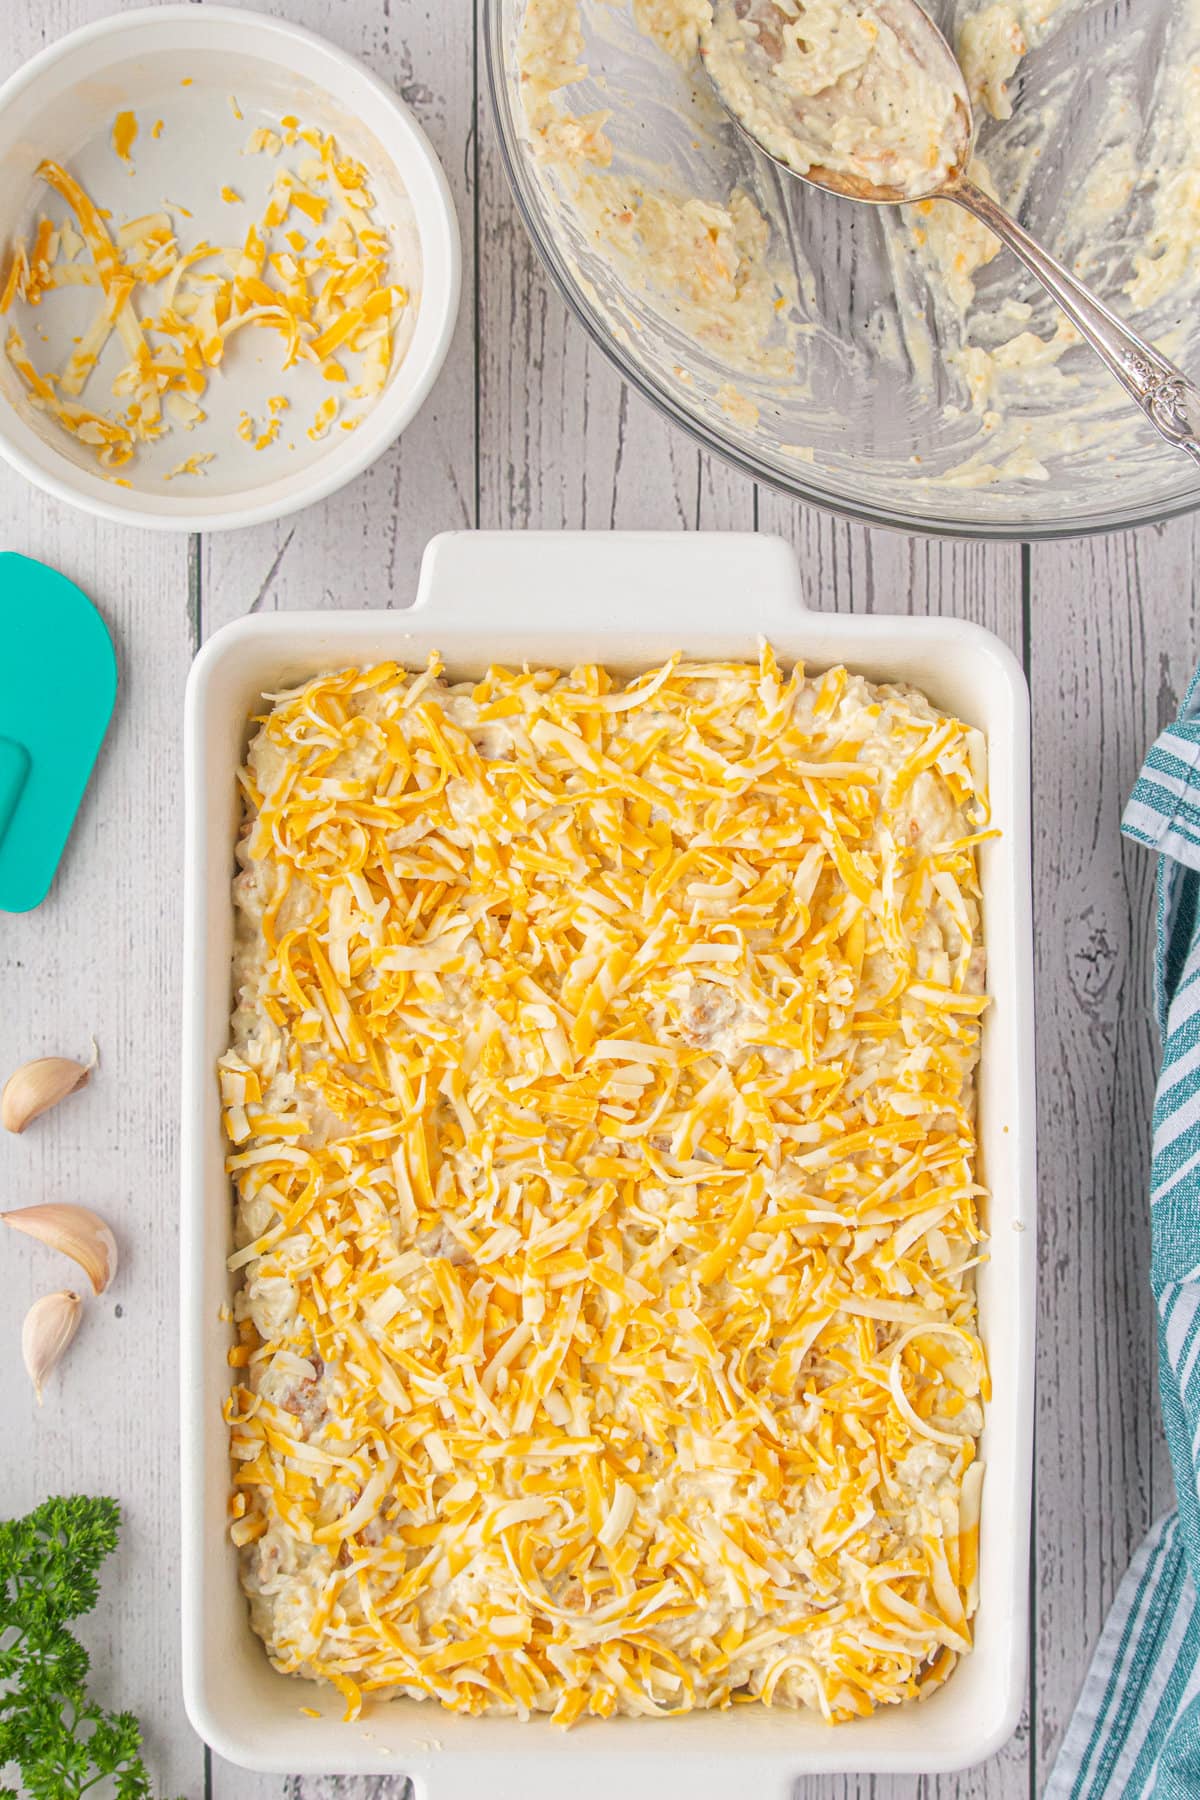 The unbaked casserole topped with more cheese.